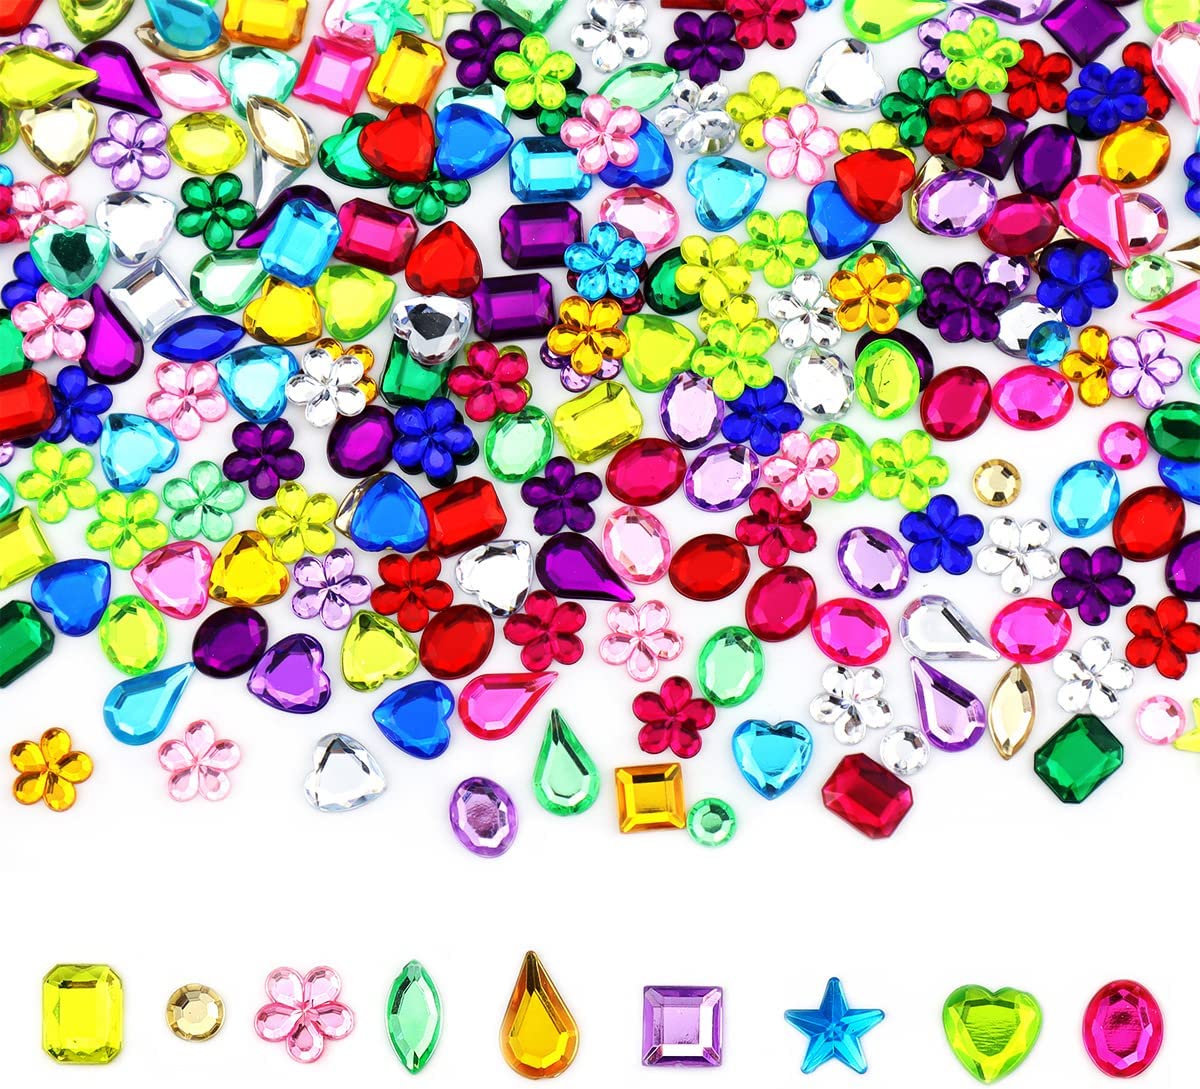  YIQIHAI 360pcs Flatback Rhinestones for Crafting, Gems Jewels  for Crafts, Acrylic Gemstone for Party Decor with Box